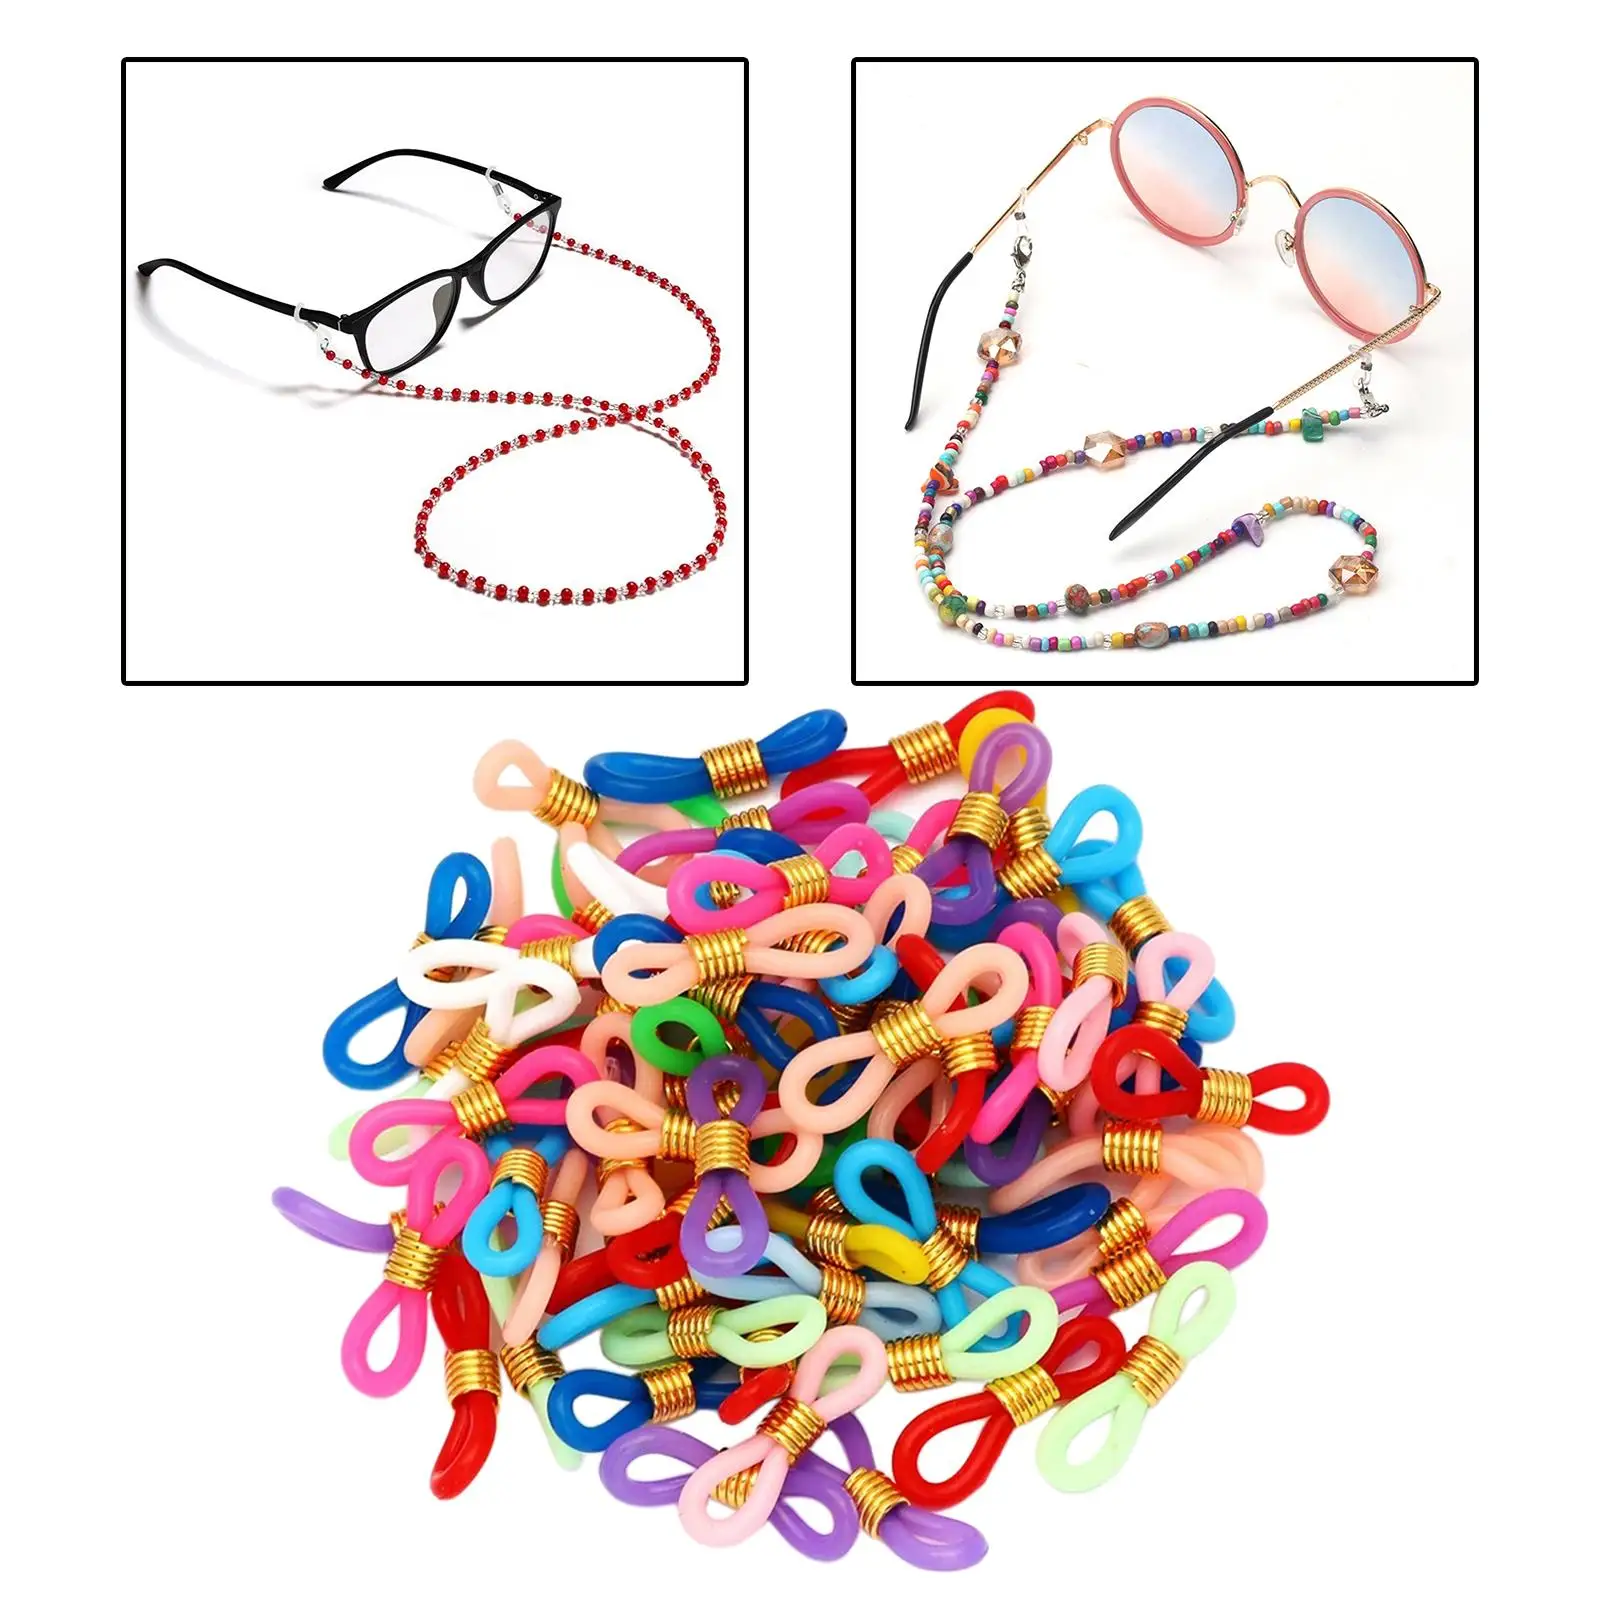 50 pcs Eyeglasses Spectacles Chain Glasses Retainer Ends Rope Sunglasses Cord Holder Strap Retainer End Loop Connector